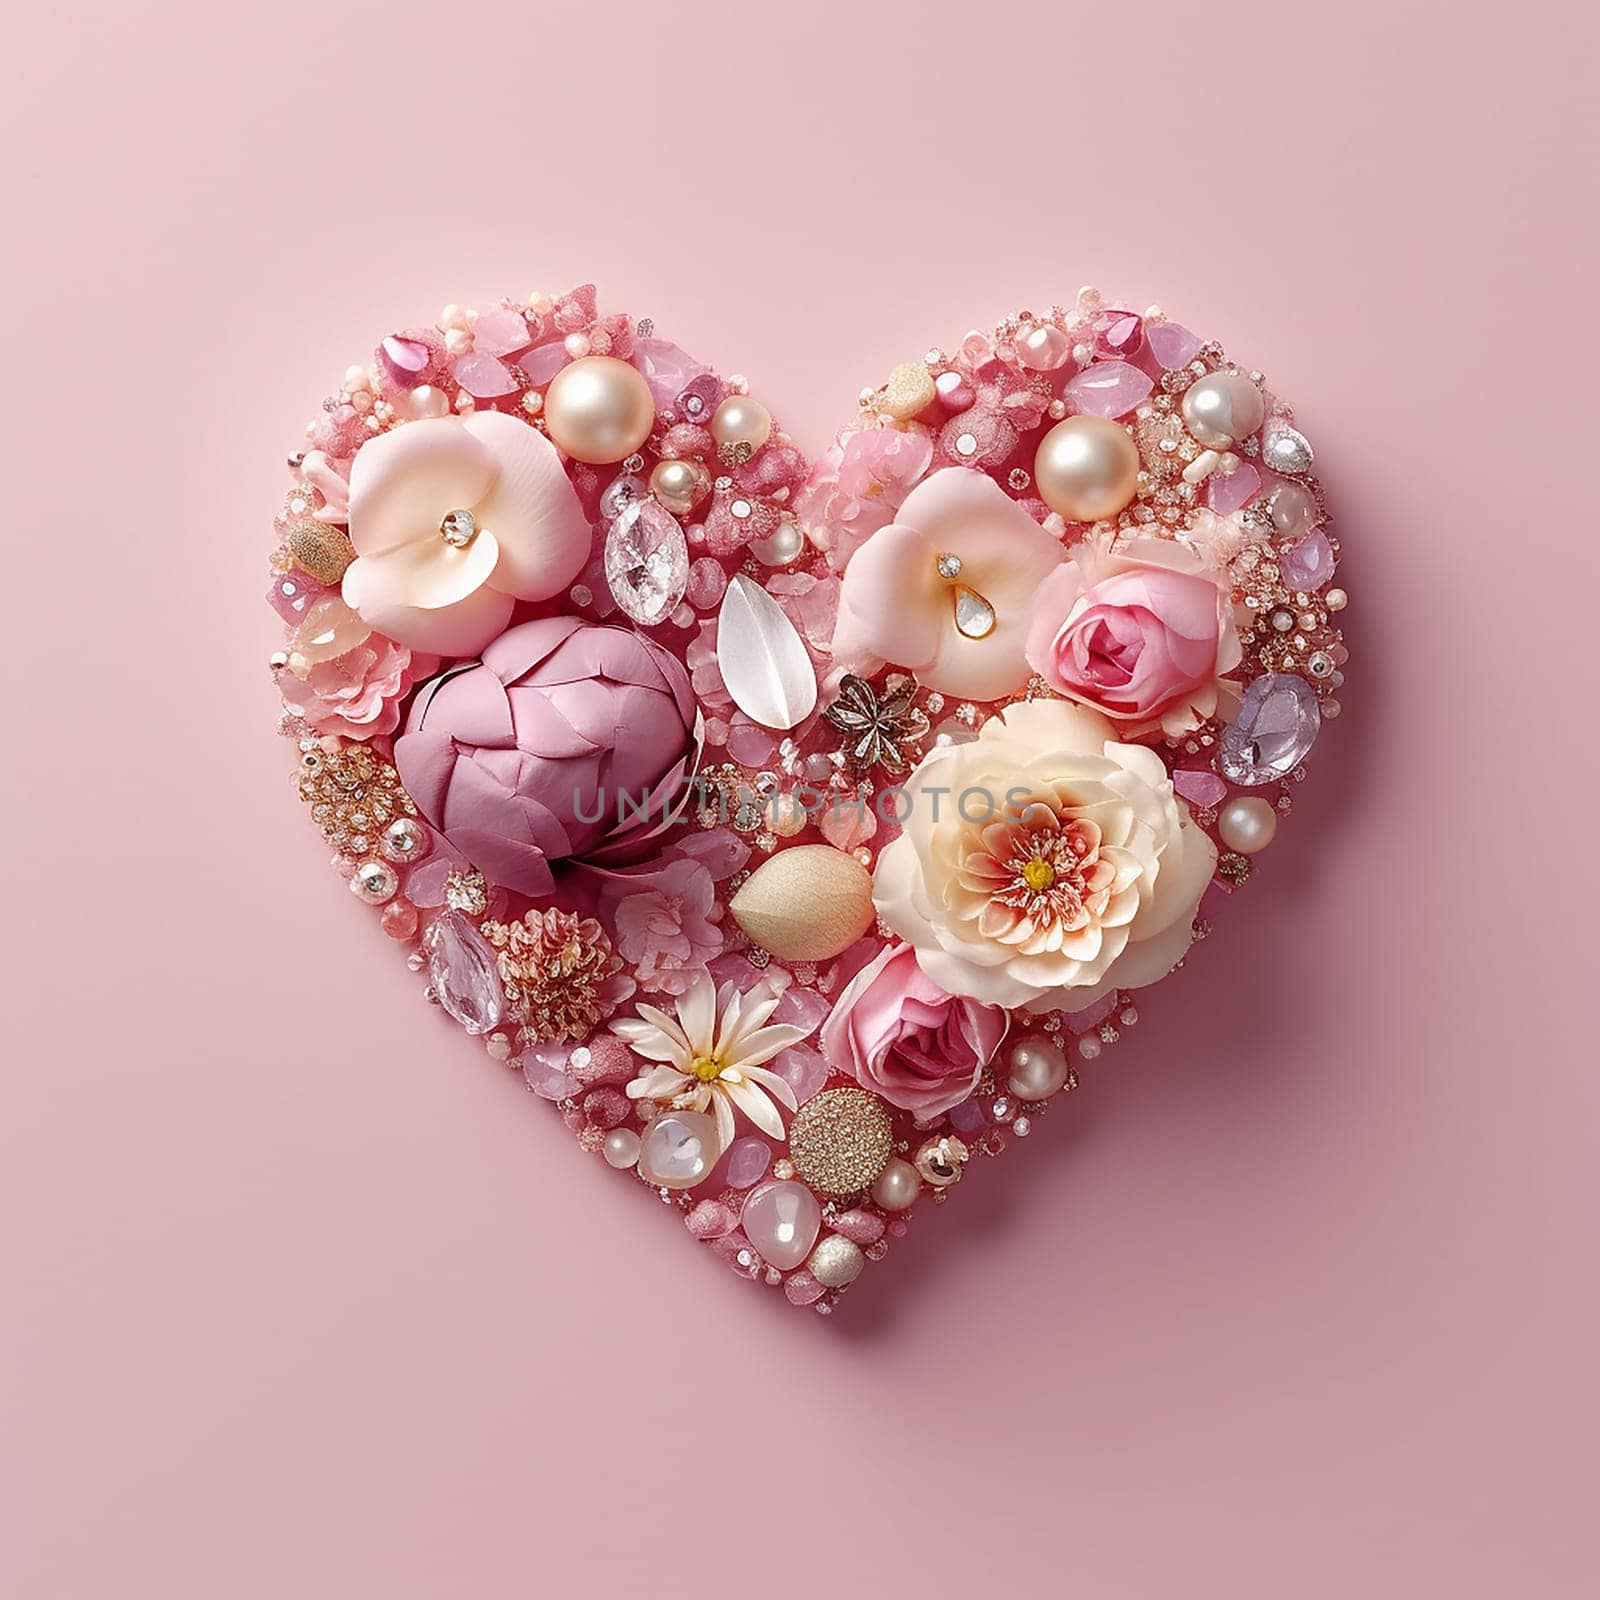 Ornate heart comprised of flowers, jewels, and beads on pink background.